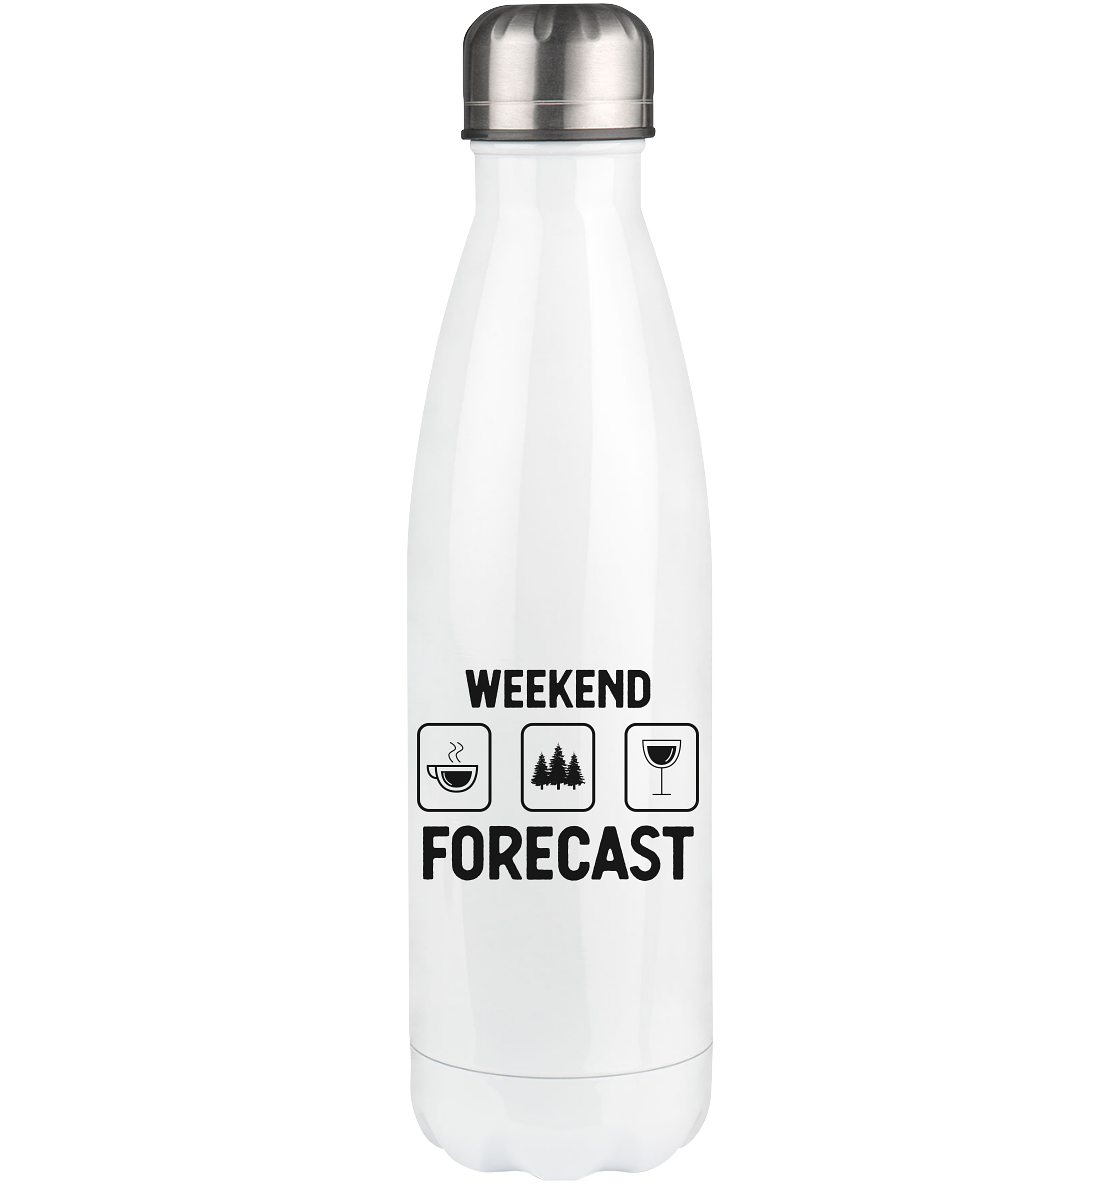 Weekend Forecast 3 - Edelstahl Thermosflasche camping UONP 500ml